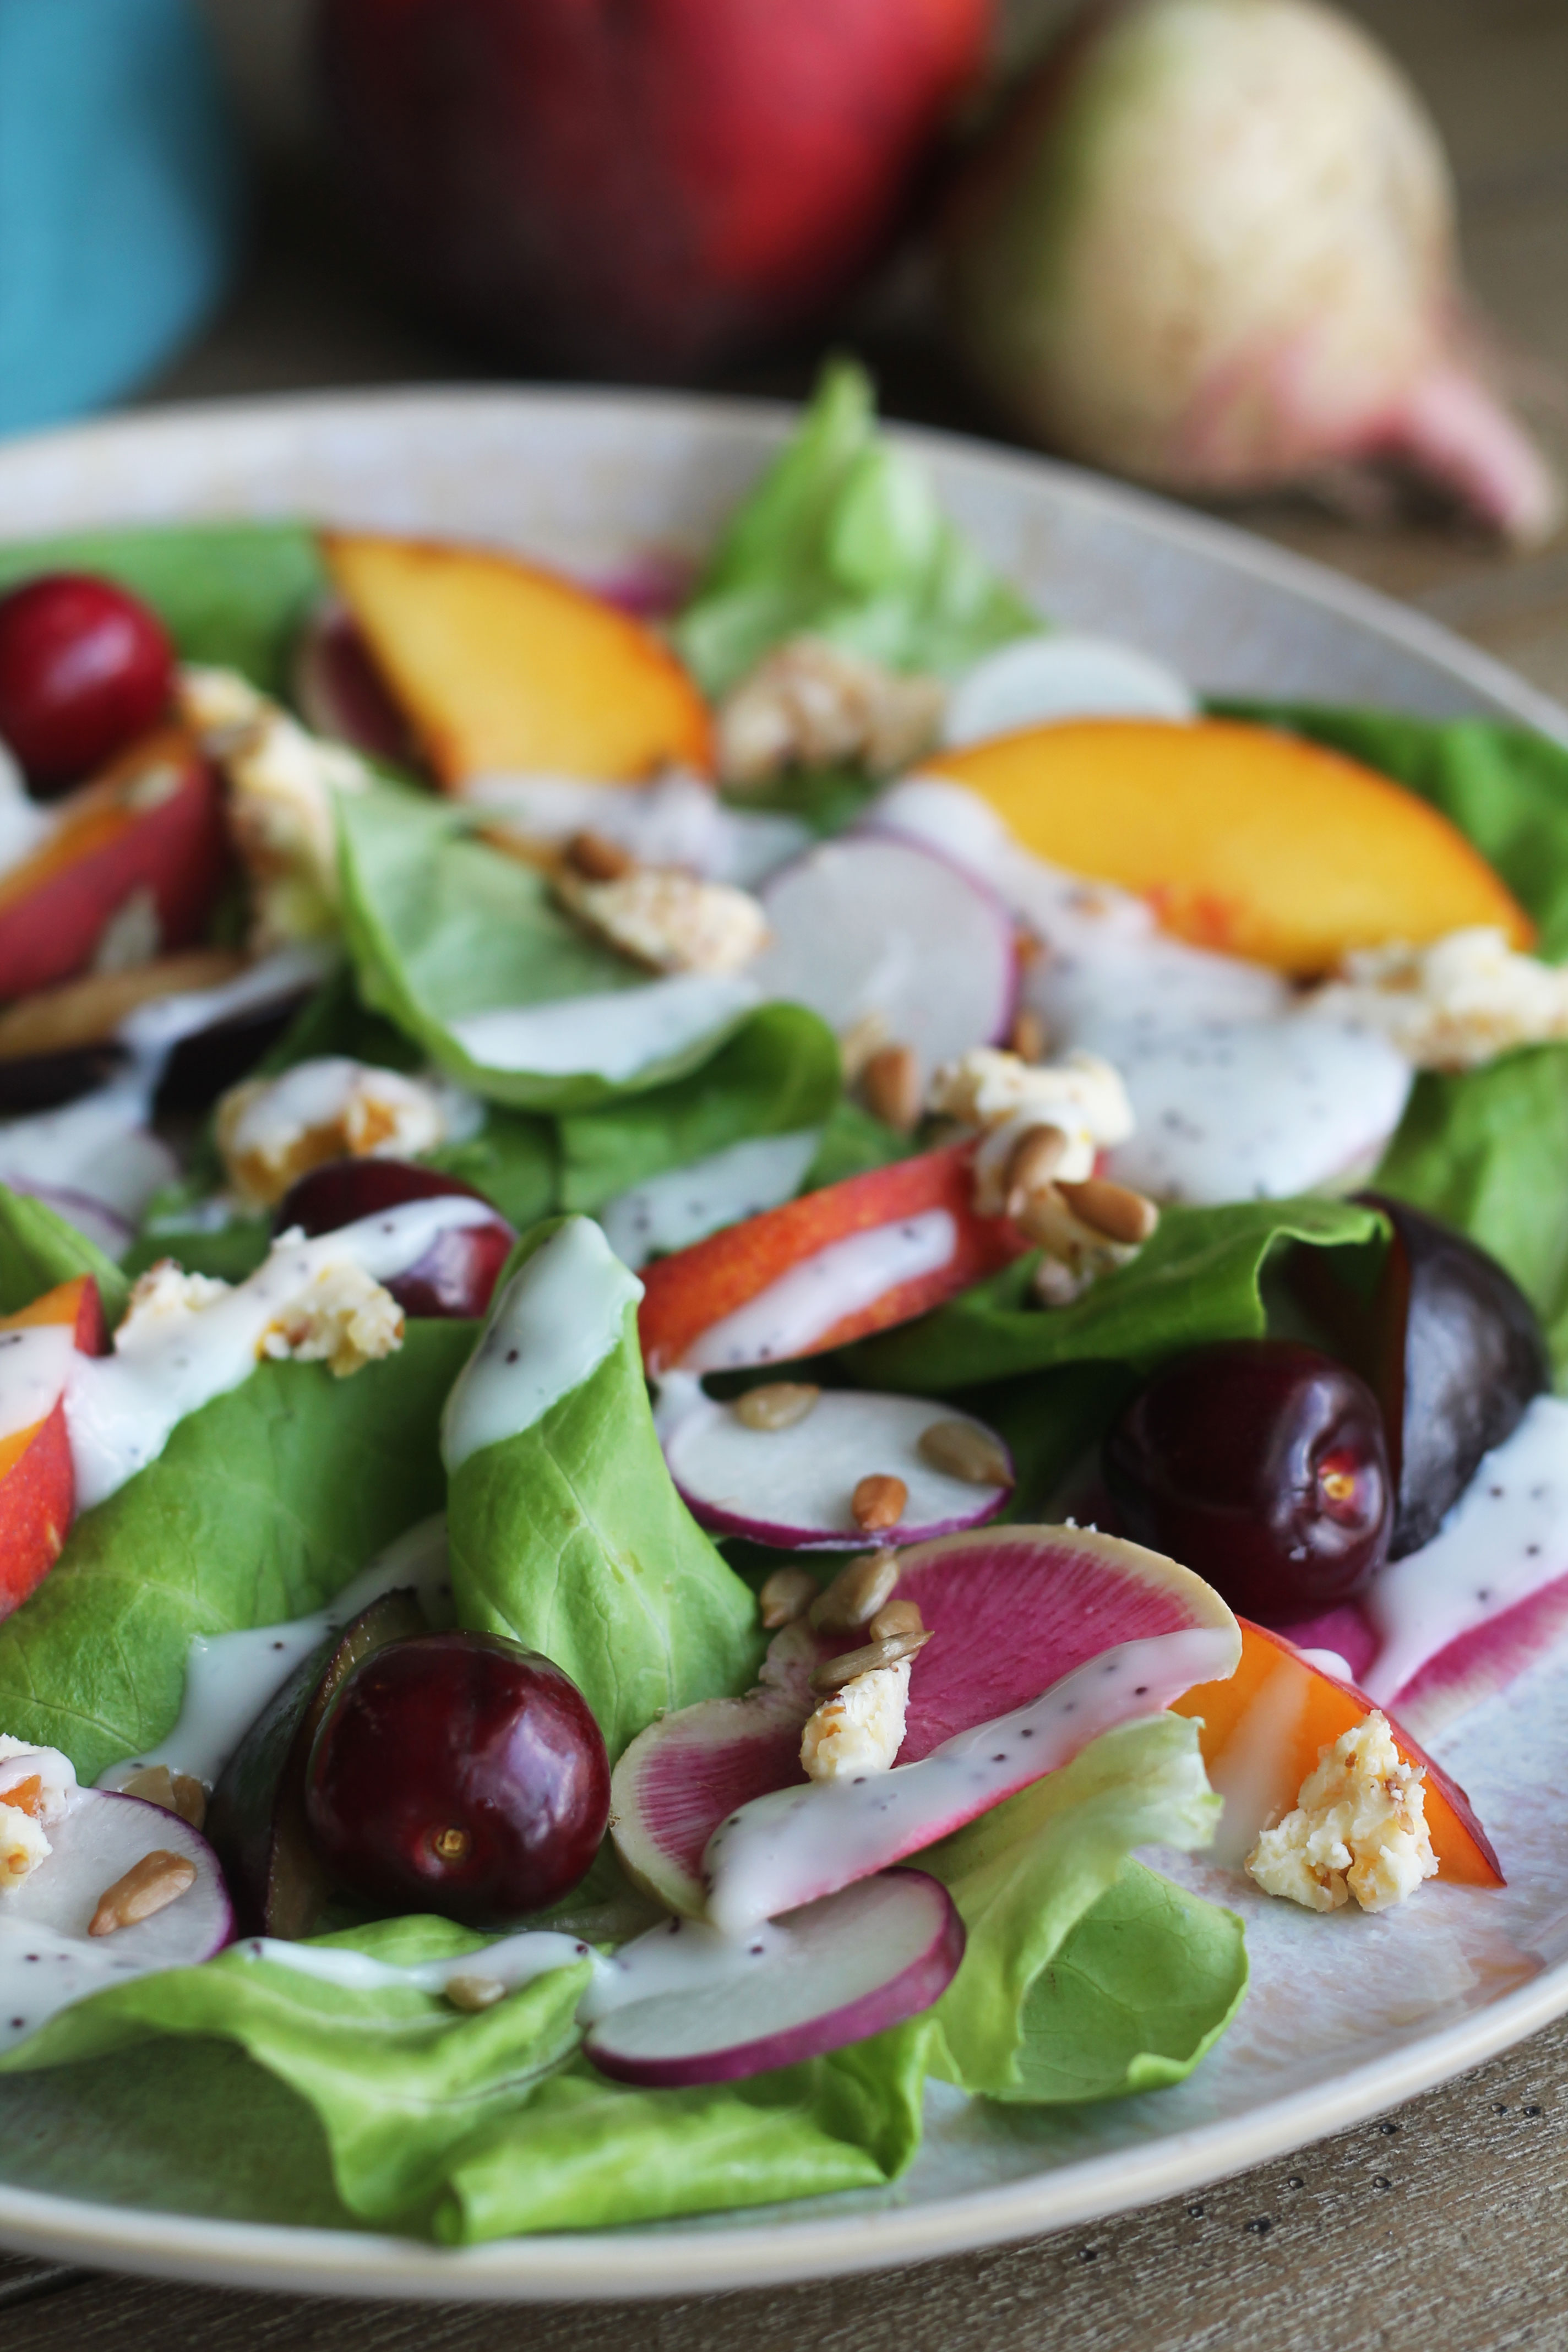 This summer salad combines all the sweet and tart stone fruits with some peppery radishes